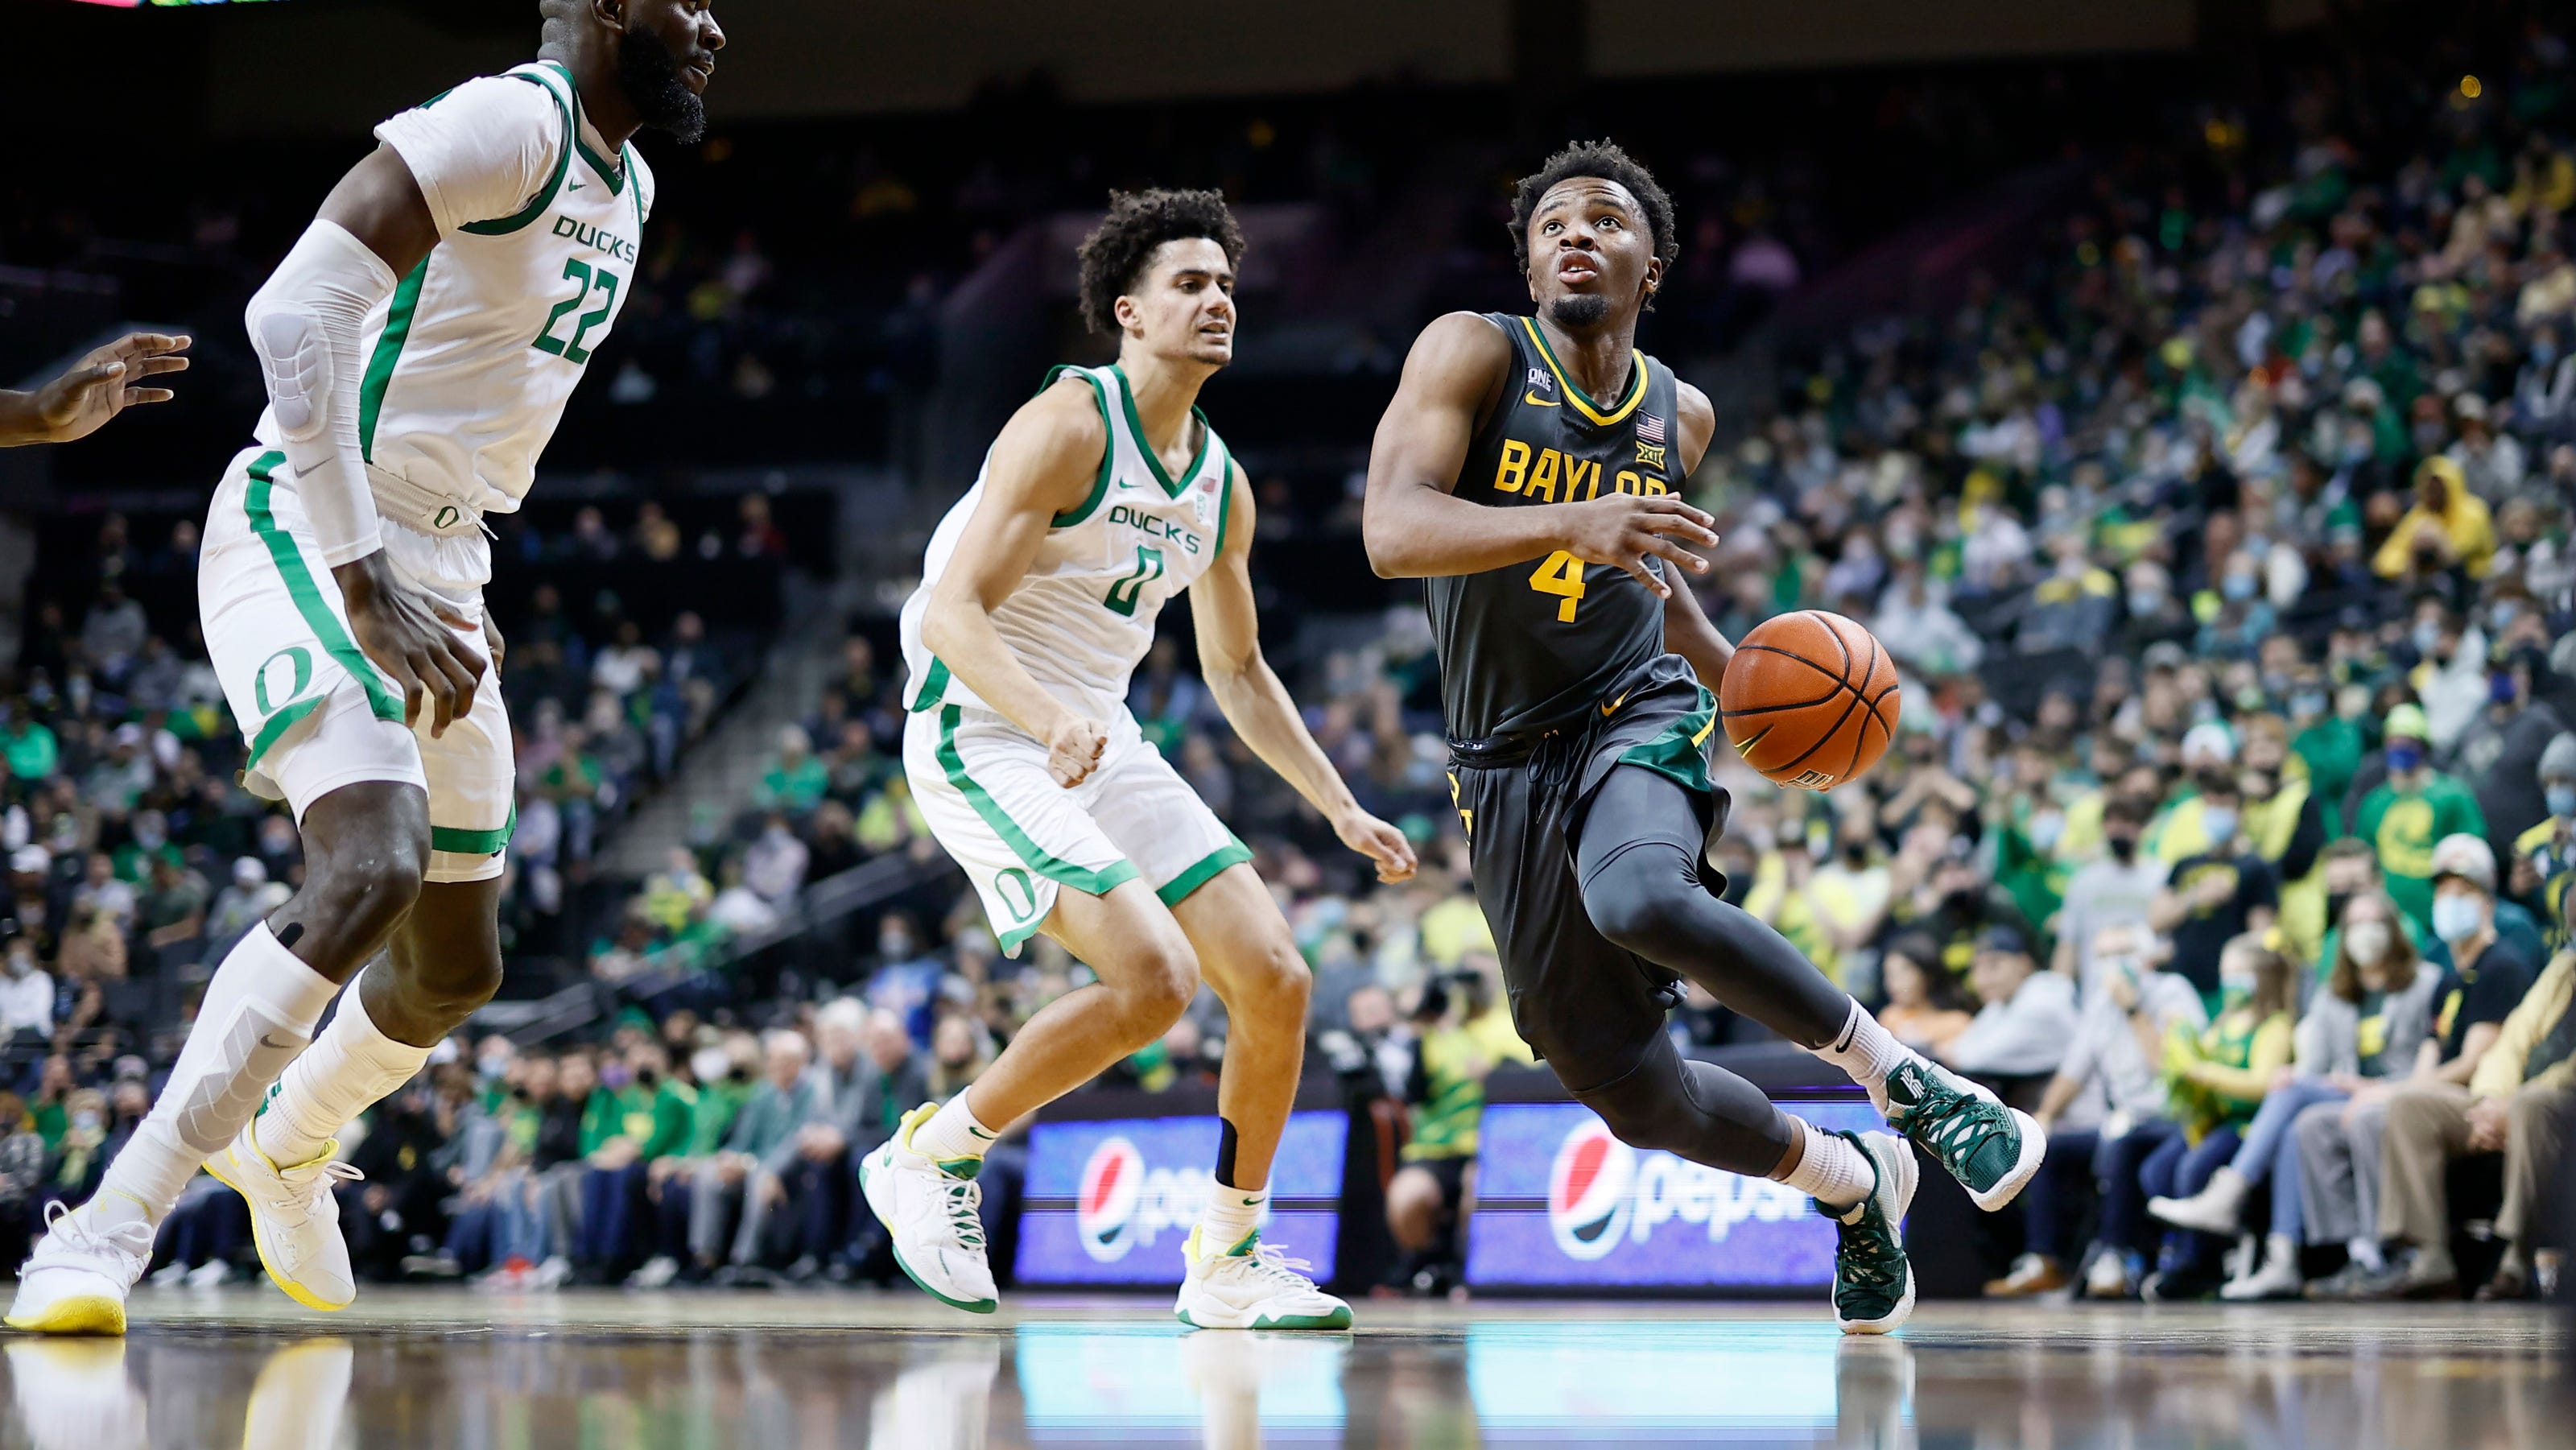 College basketball coaches poll Baylor leads Duke, Purdue at No. 1